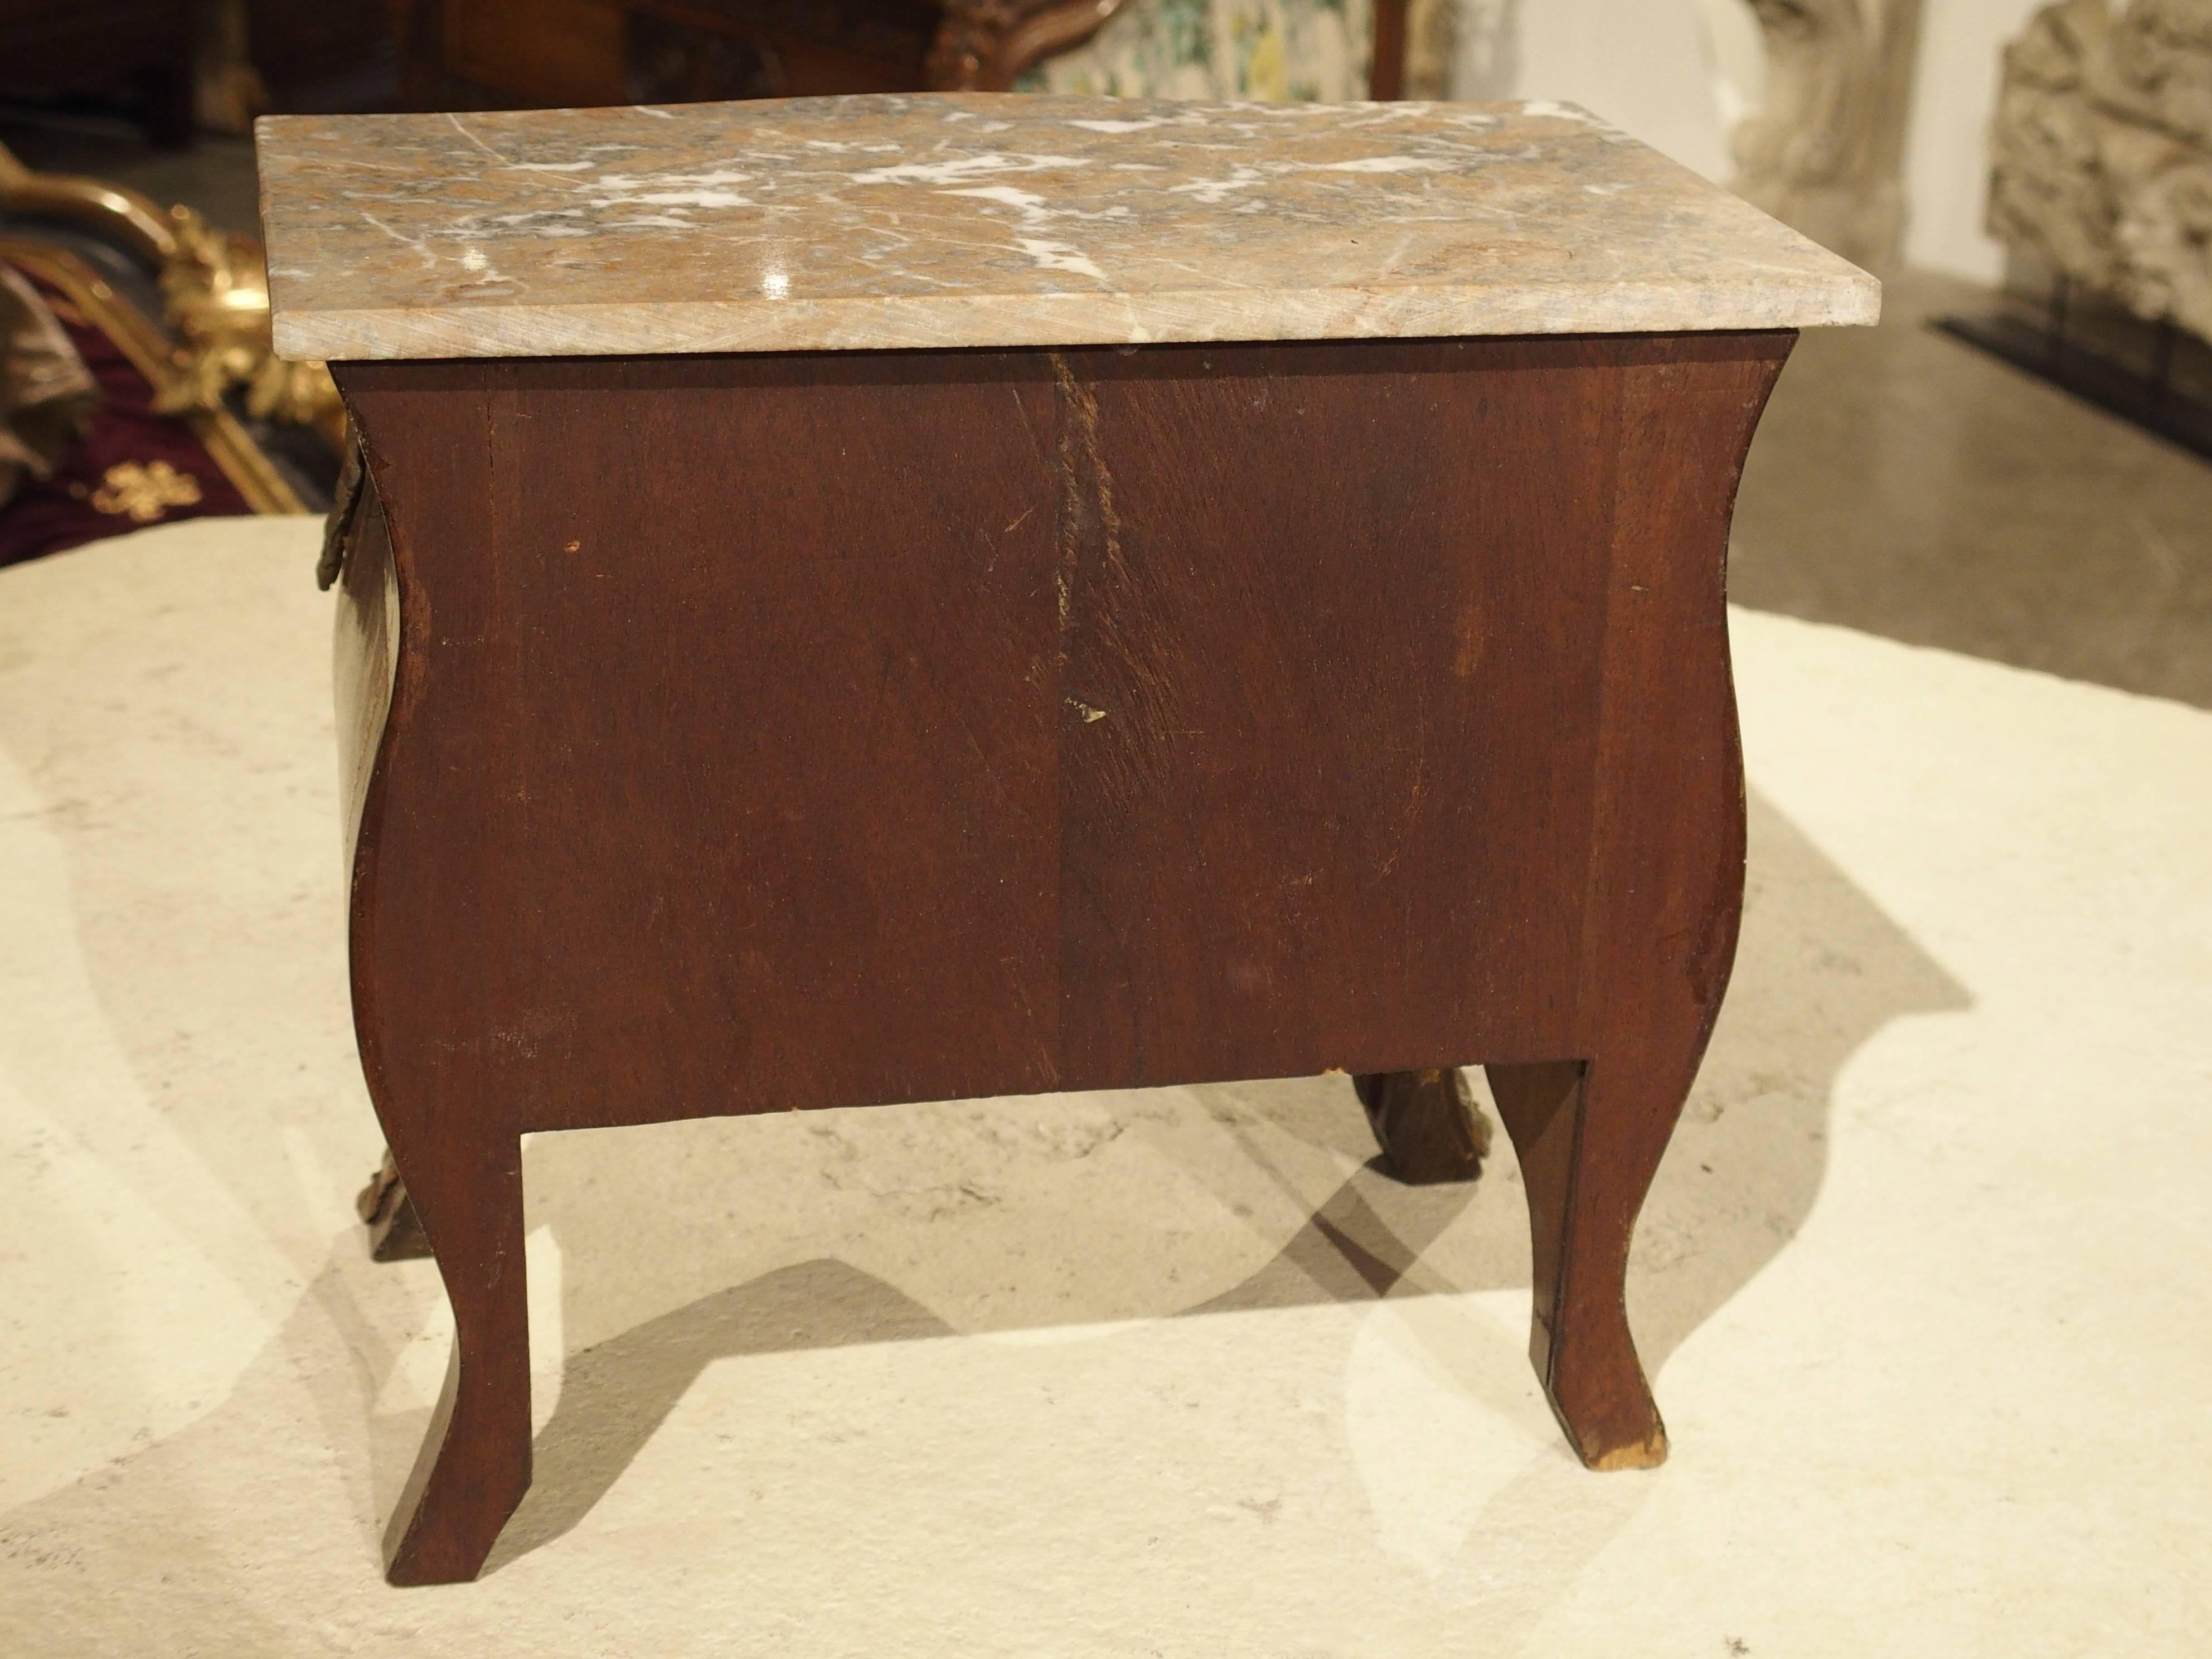 This antique miniature French tabletop commode with marble top dates to the 19th Century. It is in the Louis XV style with splayed feet, shaped (or 